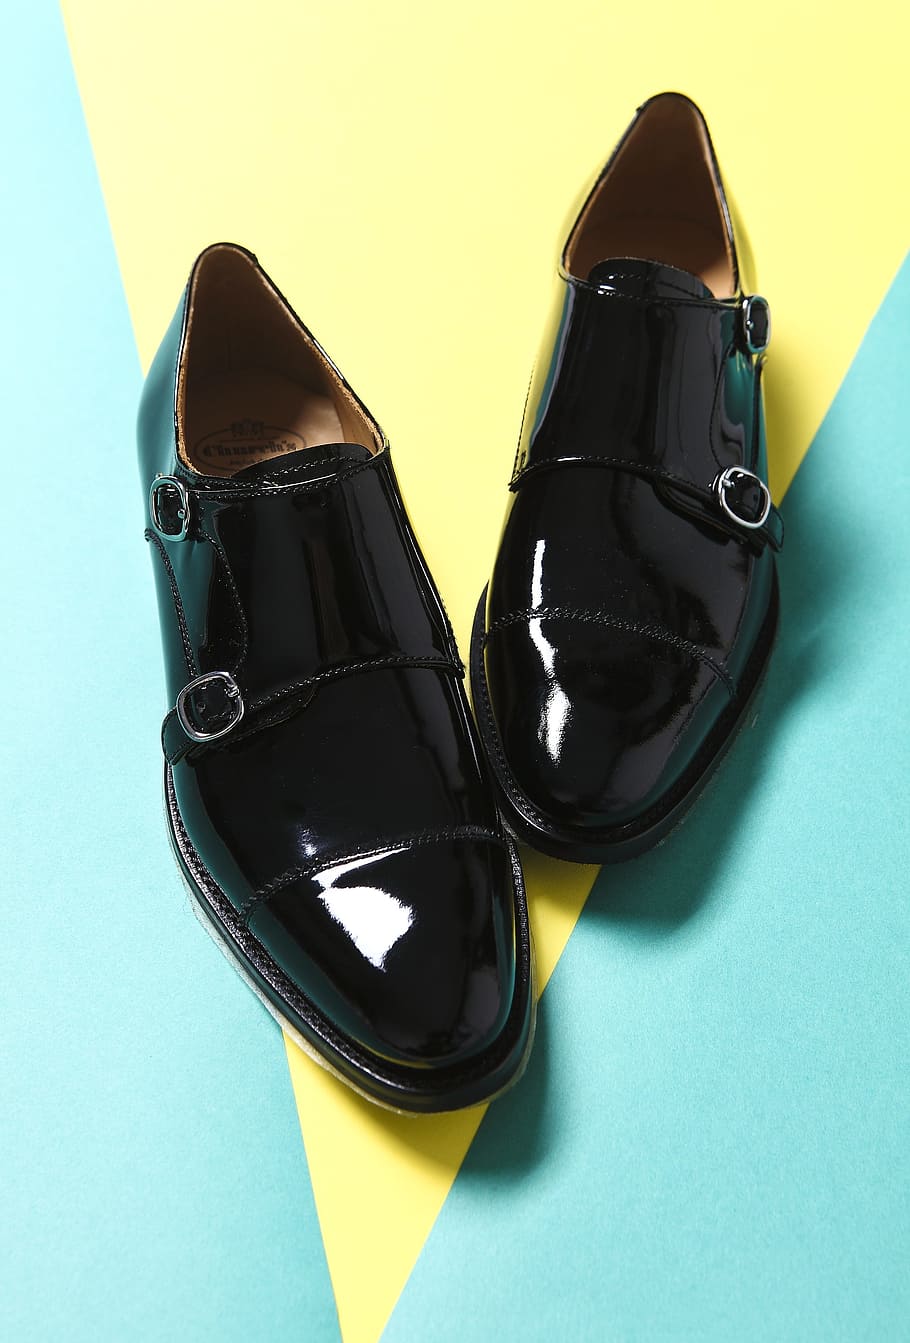 pair, black, leather loafers, leather shoes, fashion, color, line, men, office, yellow